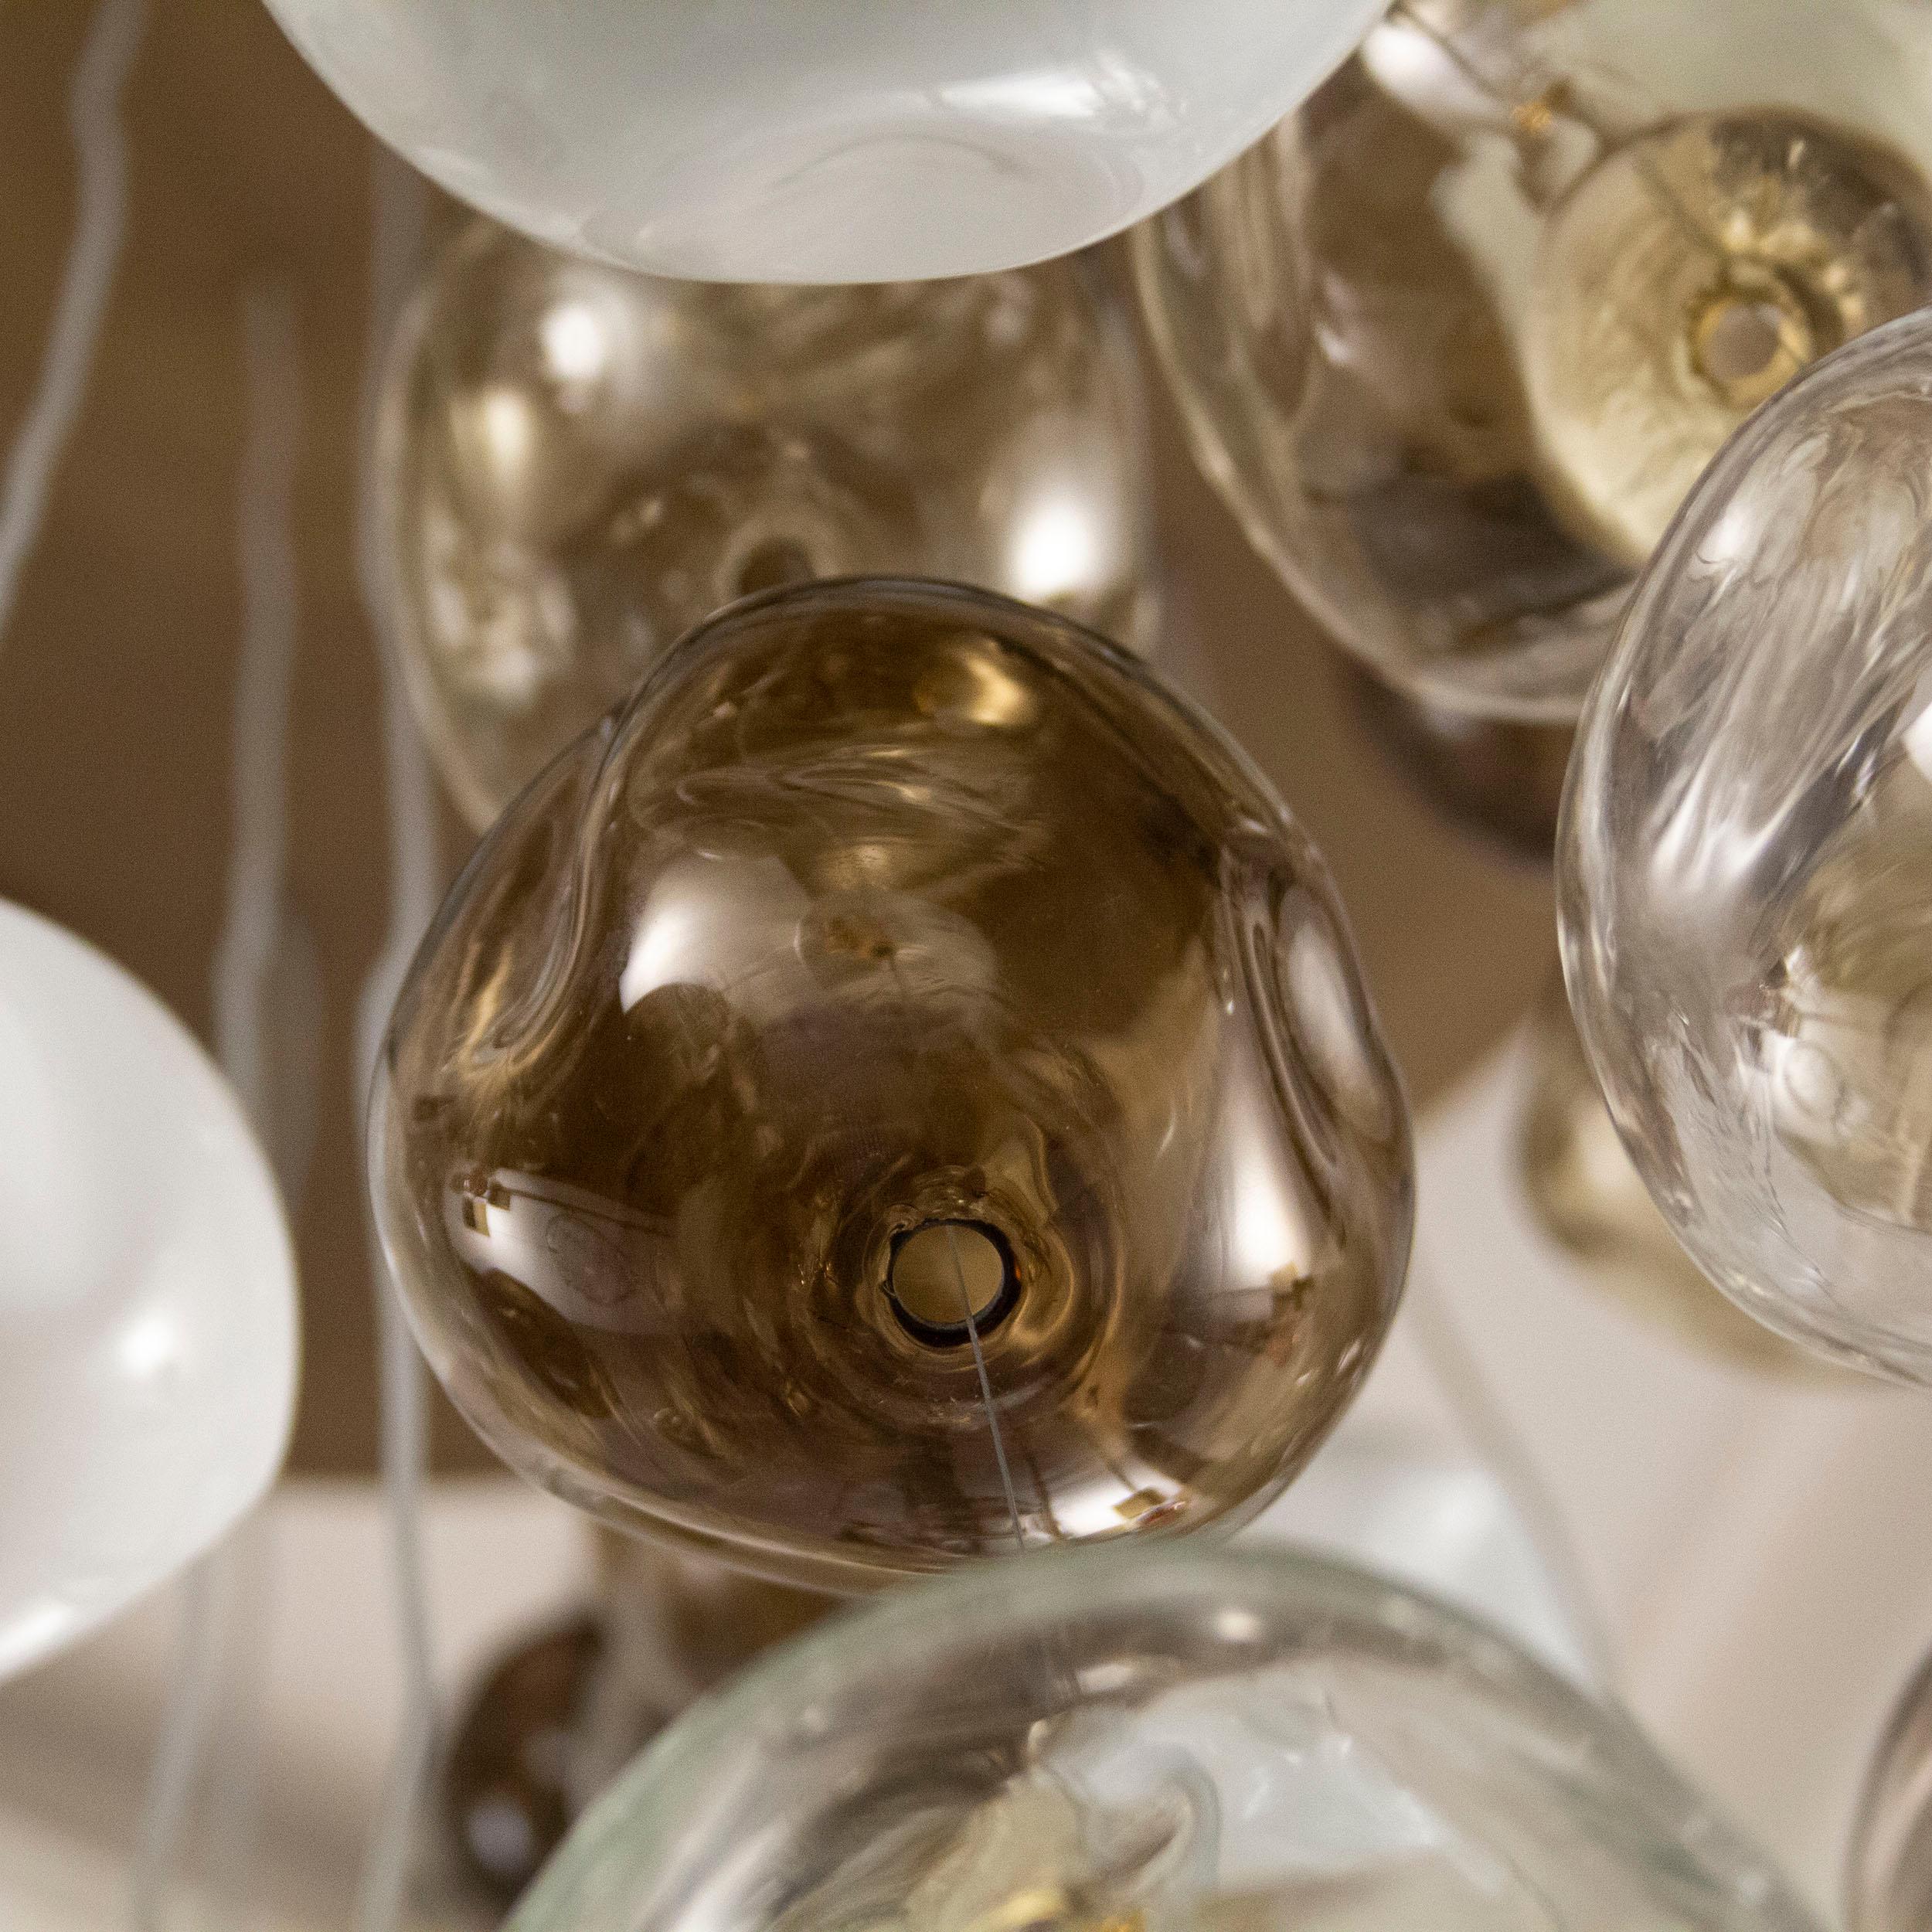 Elegant and unmistakable, suggestive and poetical, soft and delicate are some of the adjectives that can be used to describe the blown glass ball chandelier Desafinado, our ceiling light with hand-blown glass spheres.

This item consists in a new